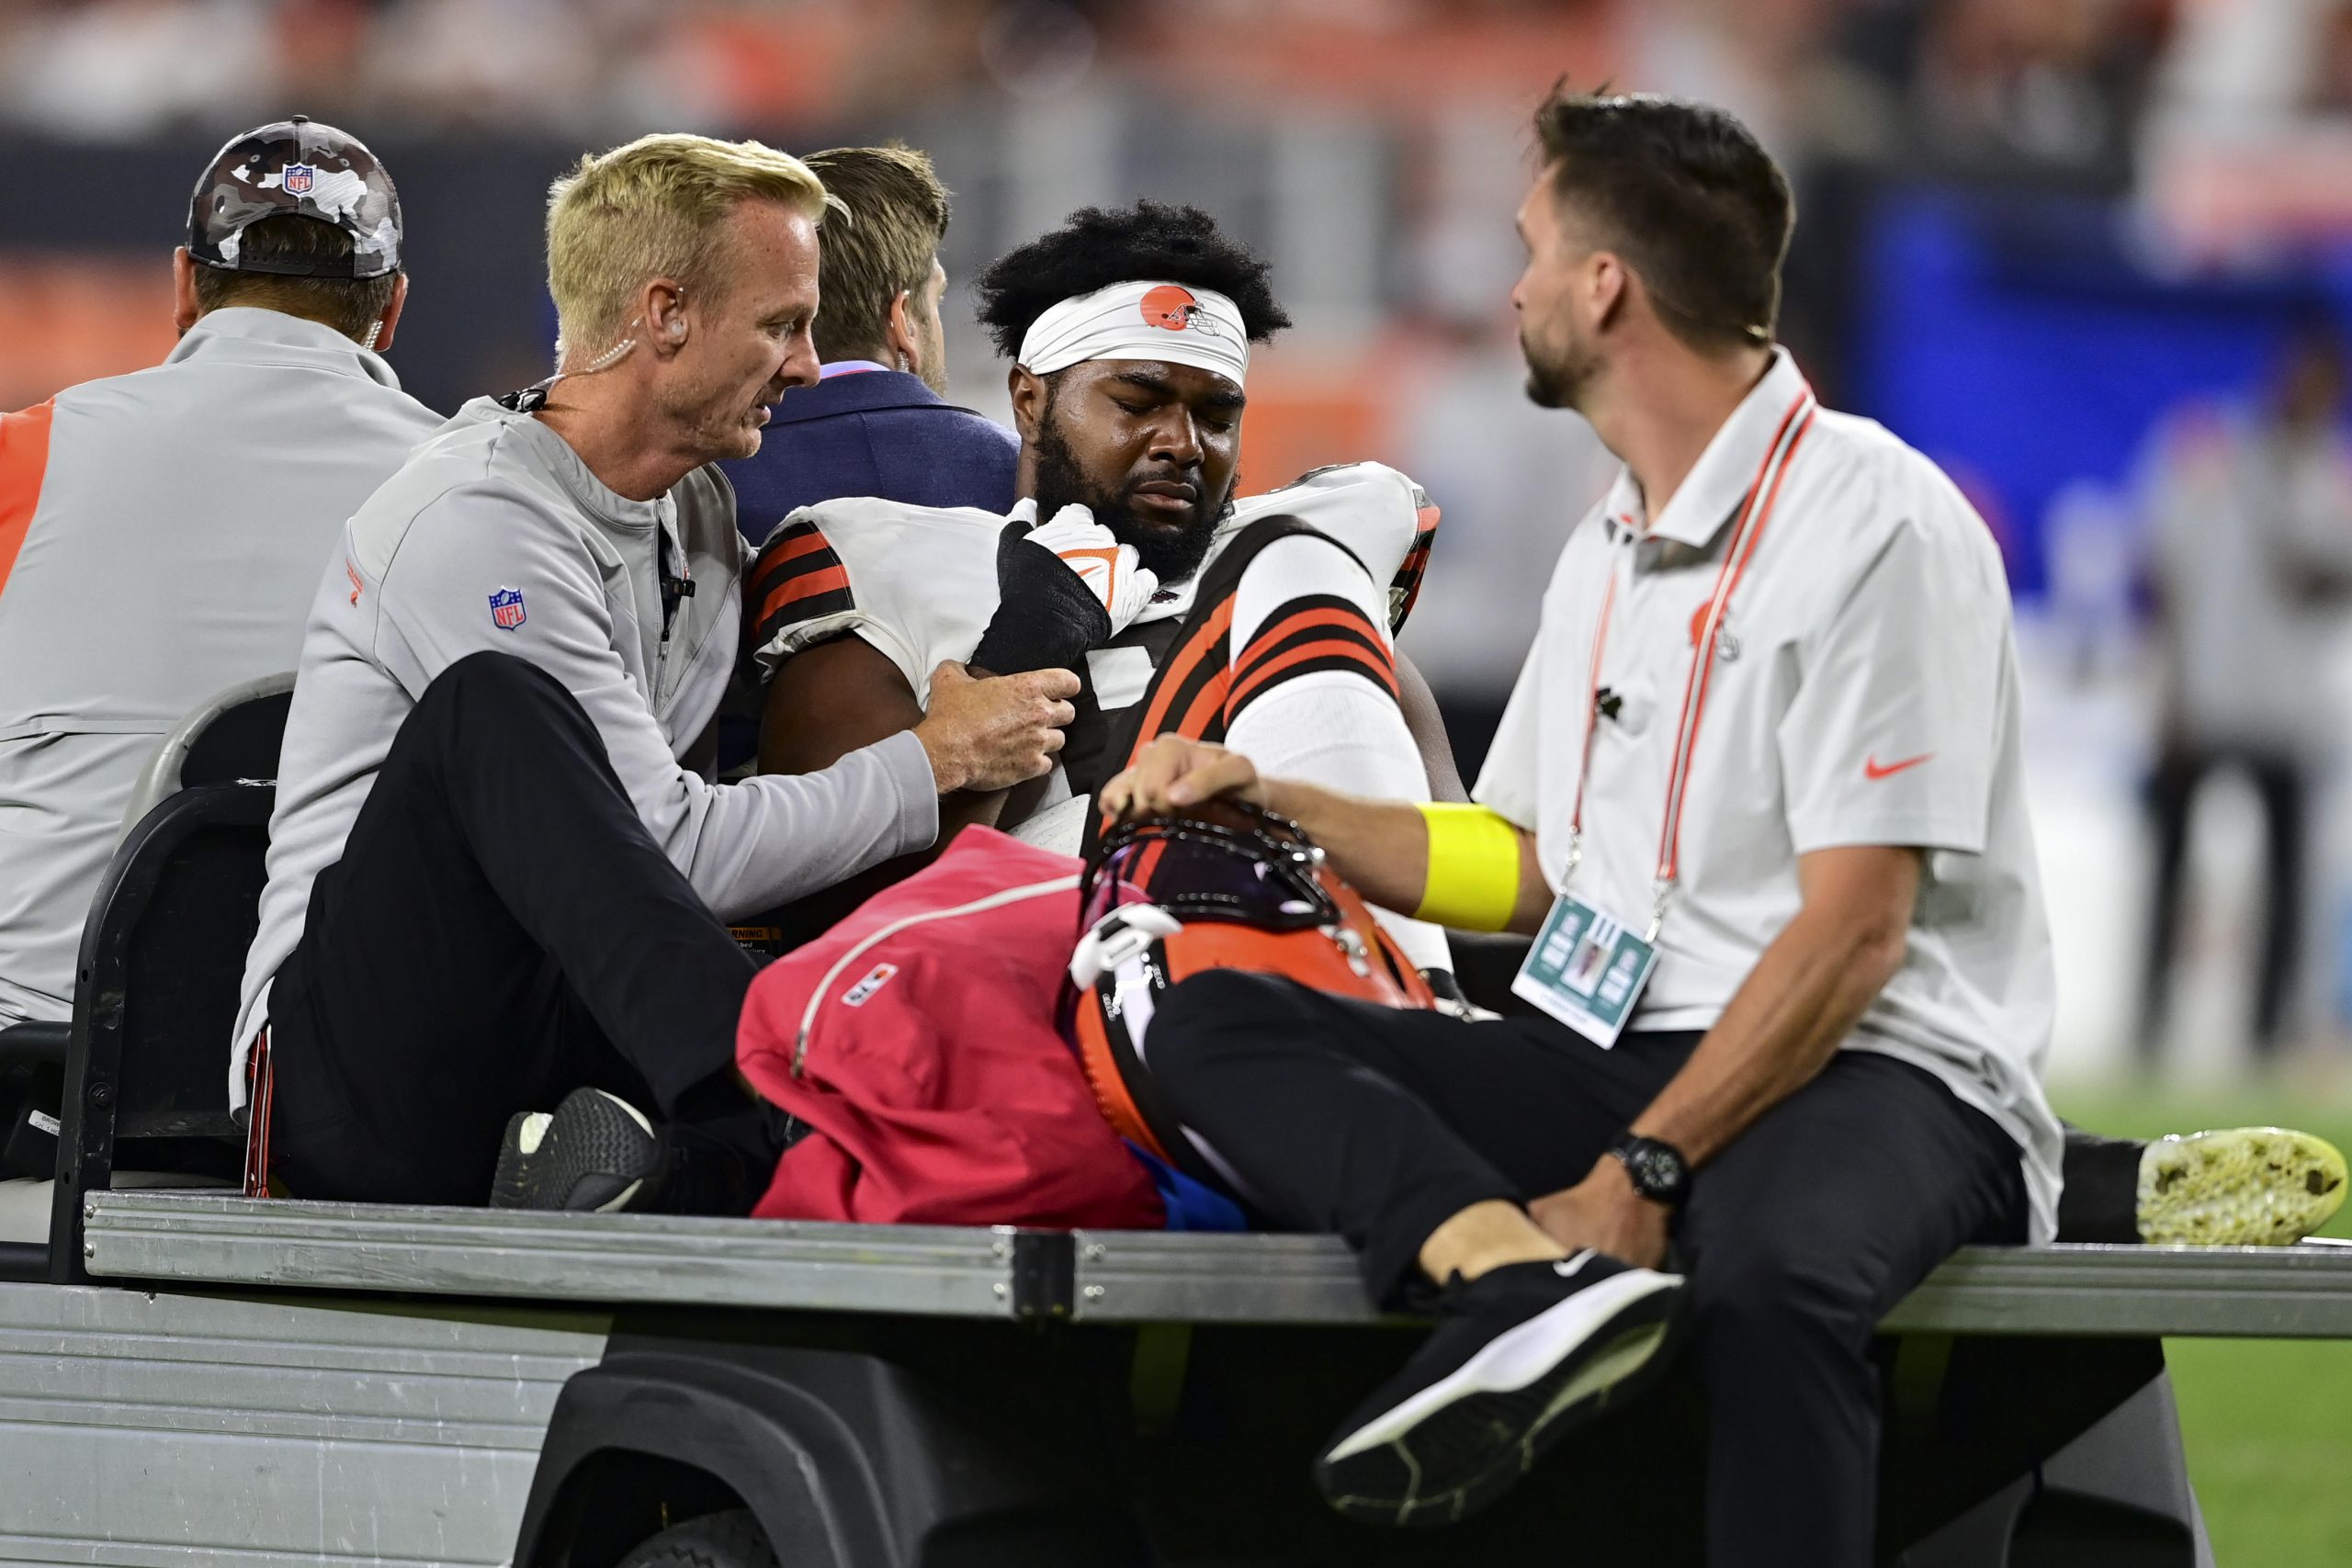 NFL 2022: 5 game-changing injuries seen in this pre-season